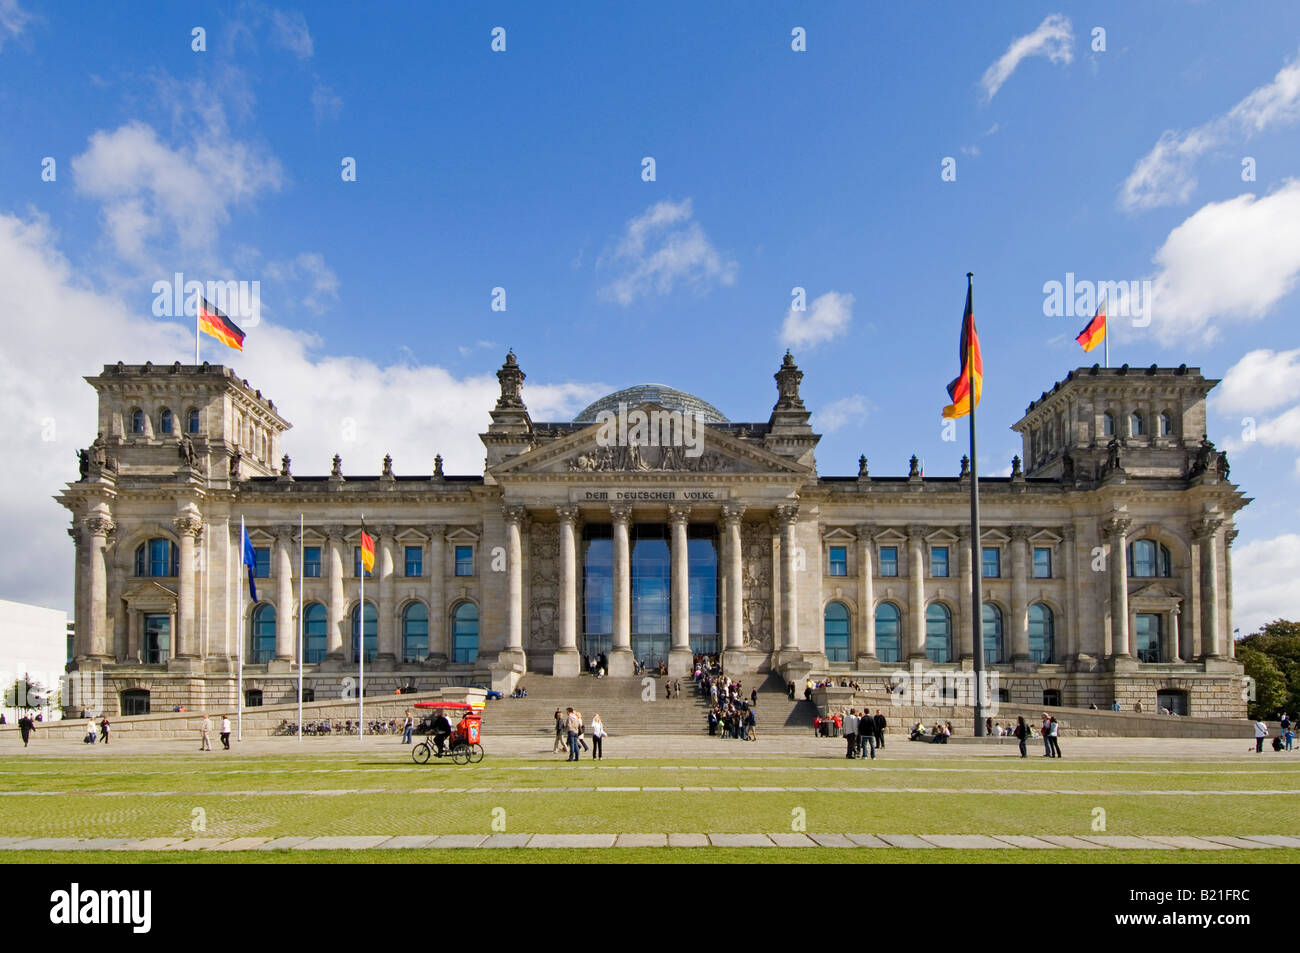 A wide angle view of the Reichstag (German Parliment Building) and tourists on a sunny day. Stock Photo